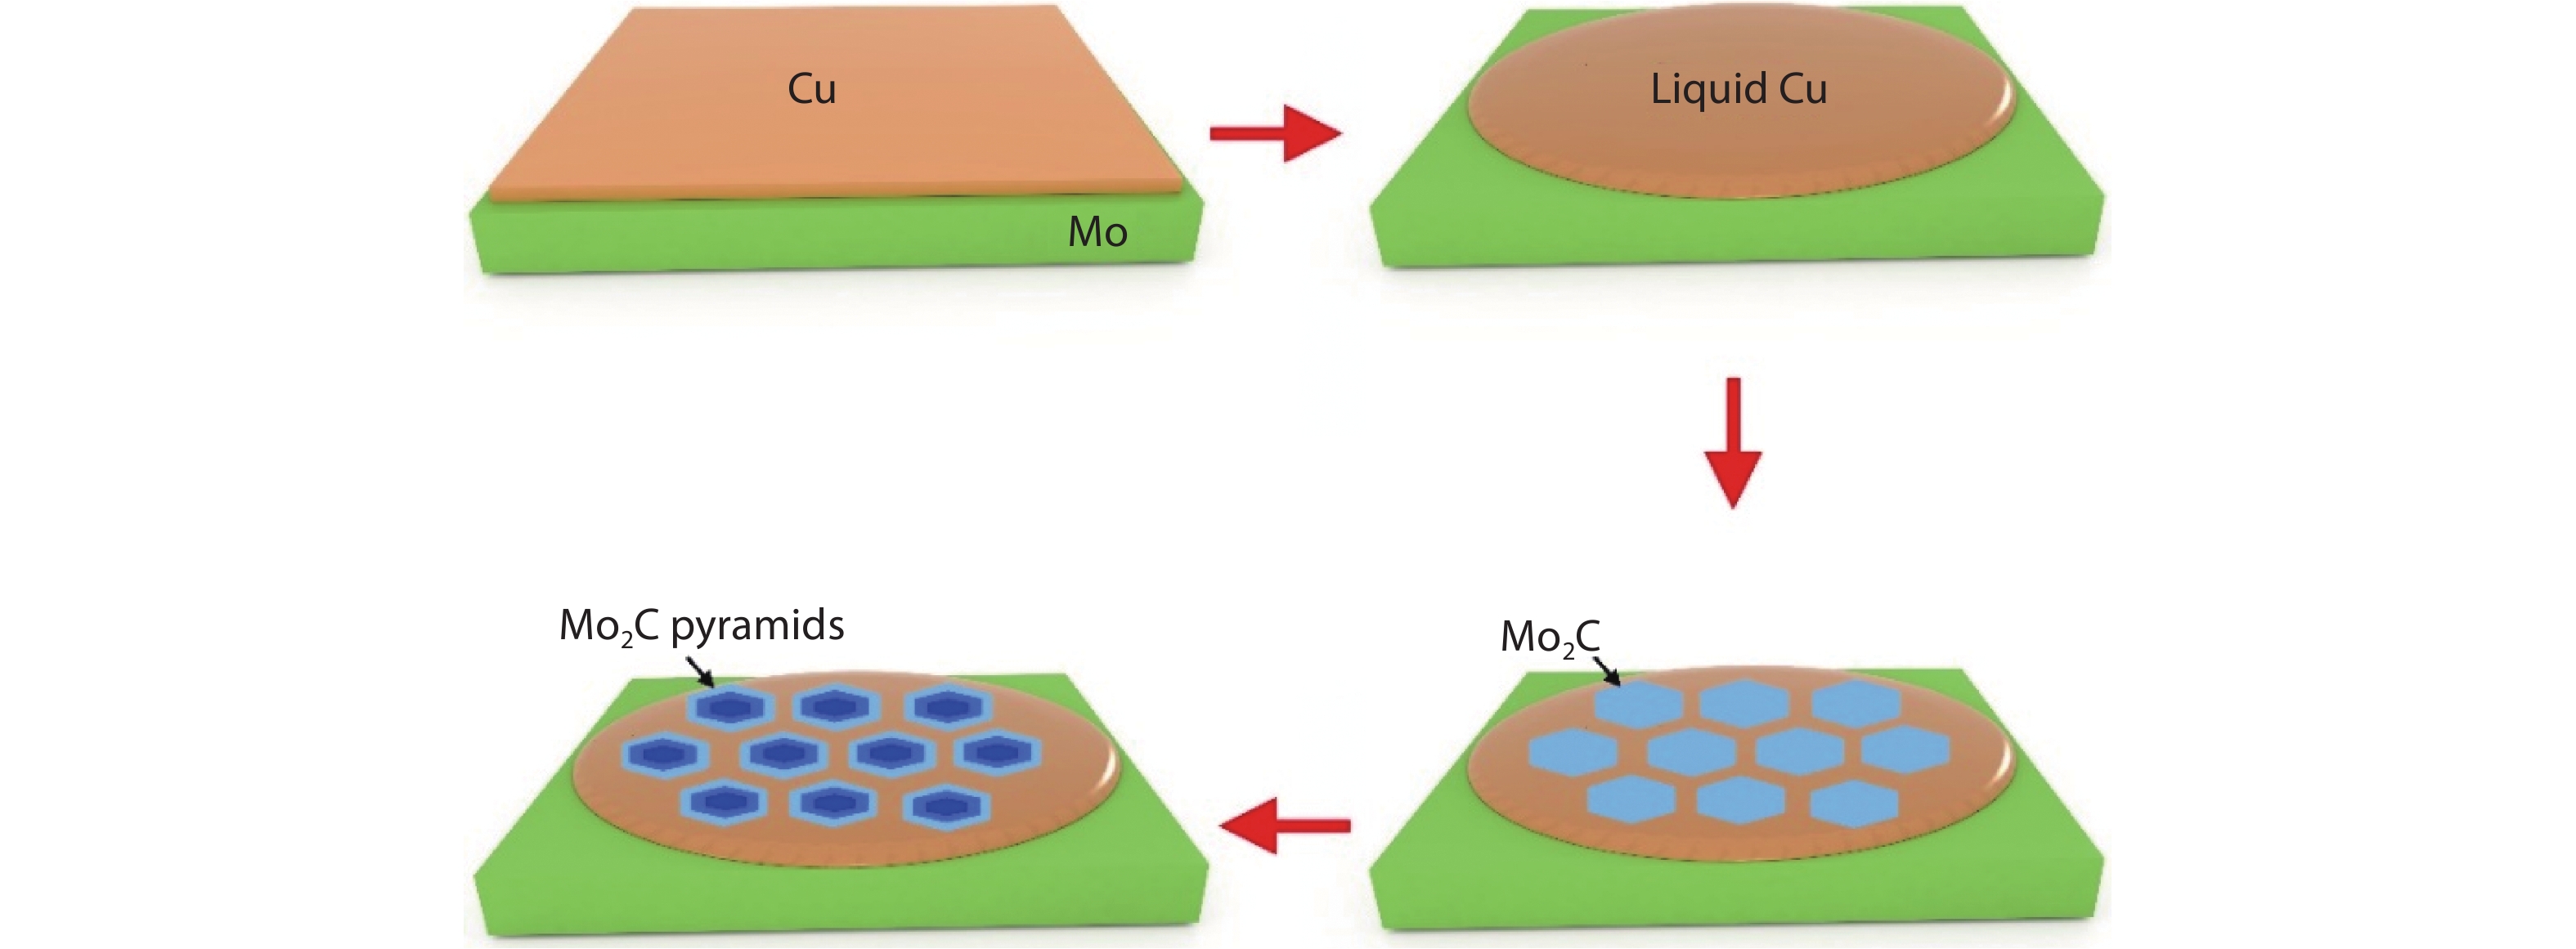 (Color online) Schematic showing the growth of Mo2C pyramids on liquid Cu substrate.